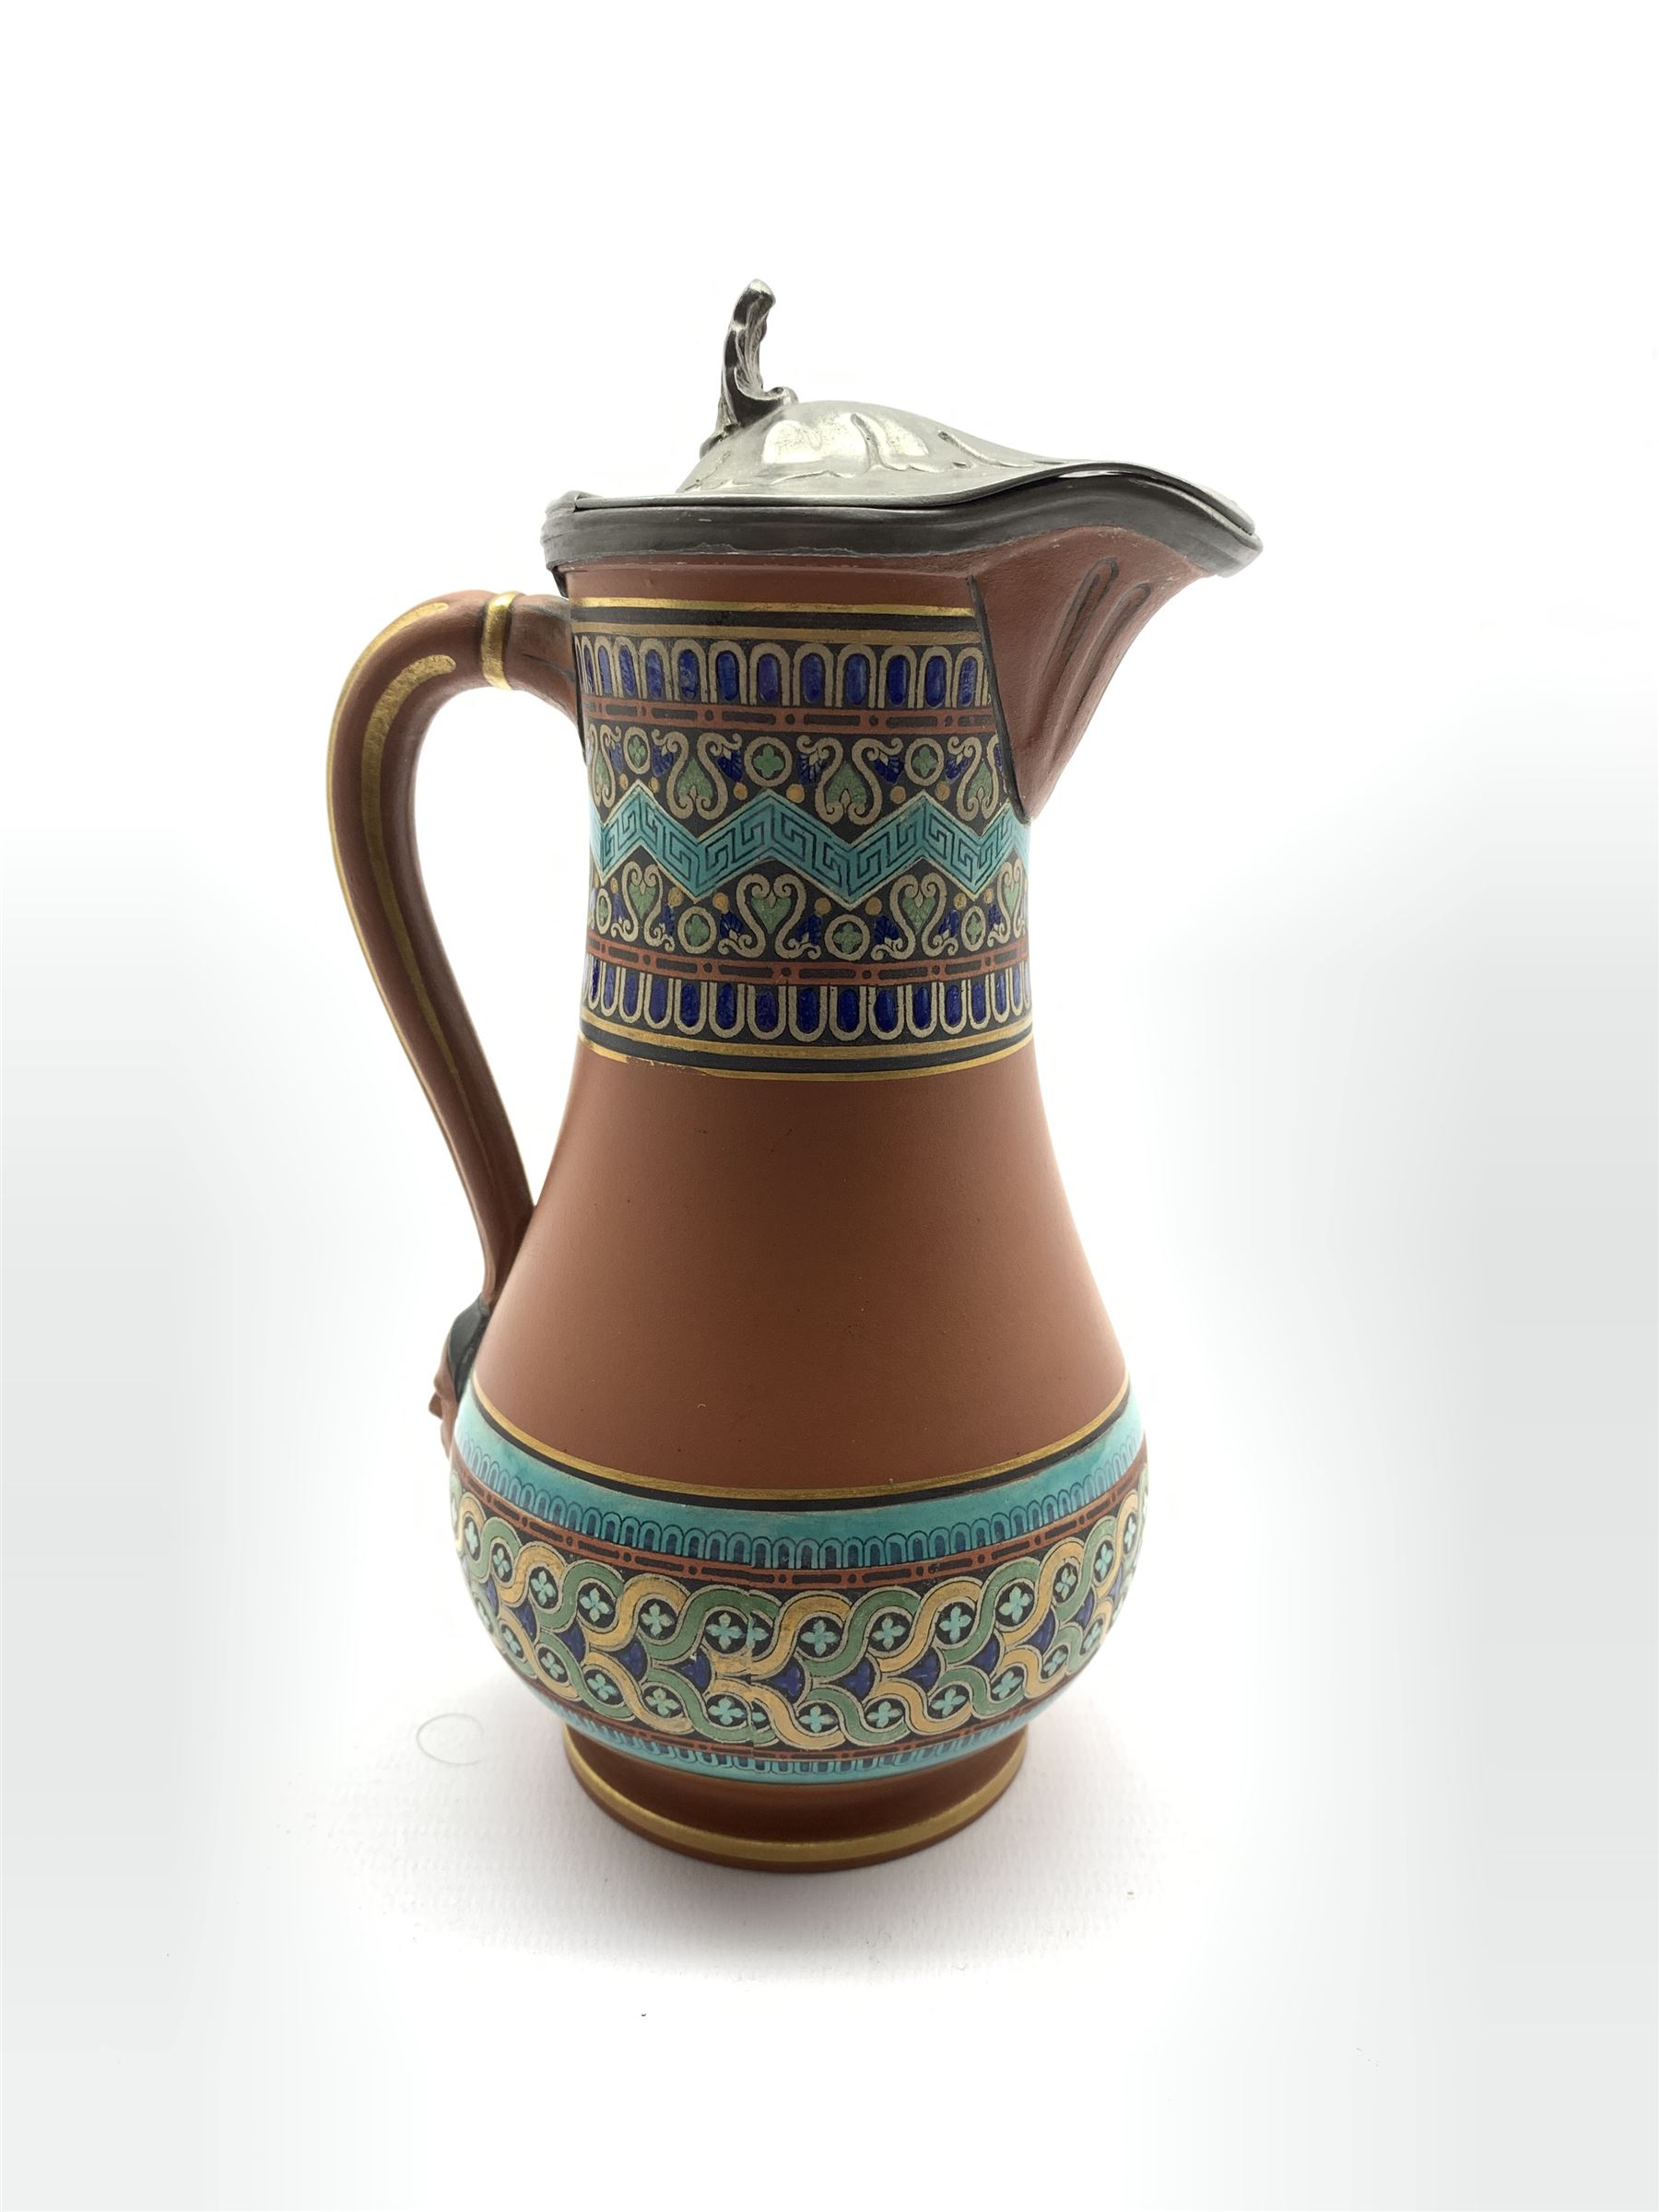 Christopher Dresser for Watcombe pottery